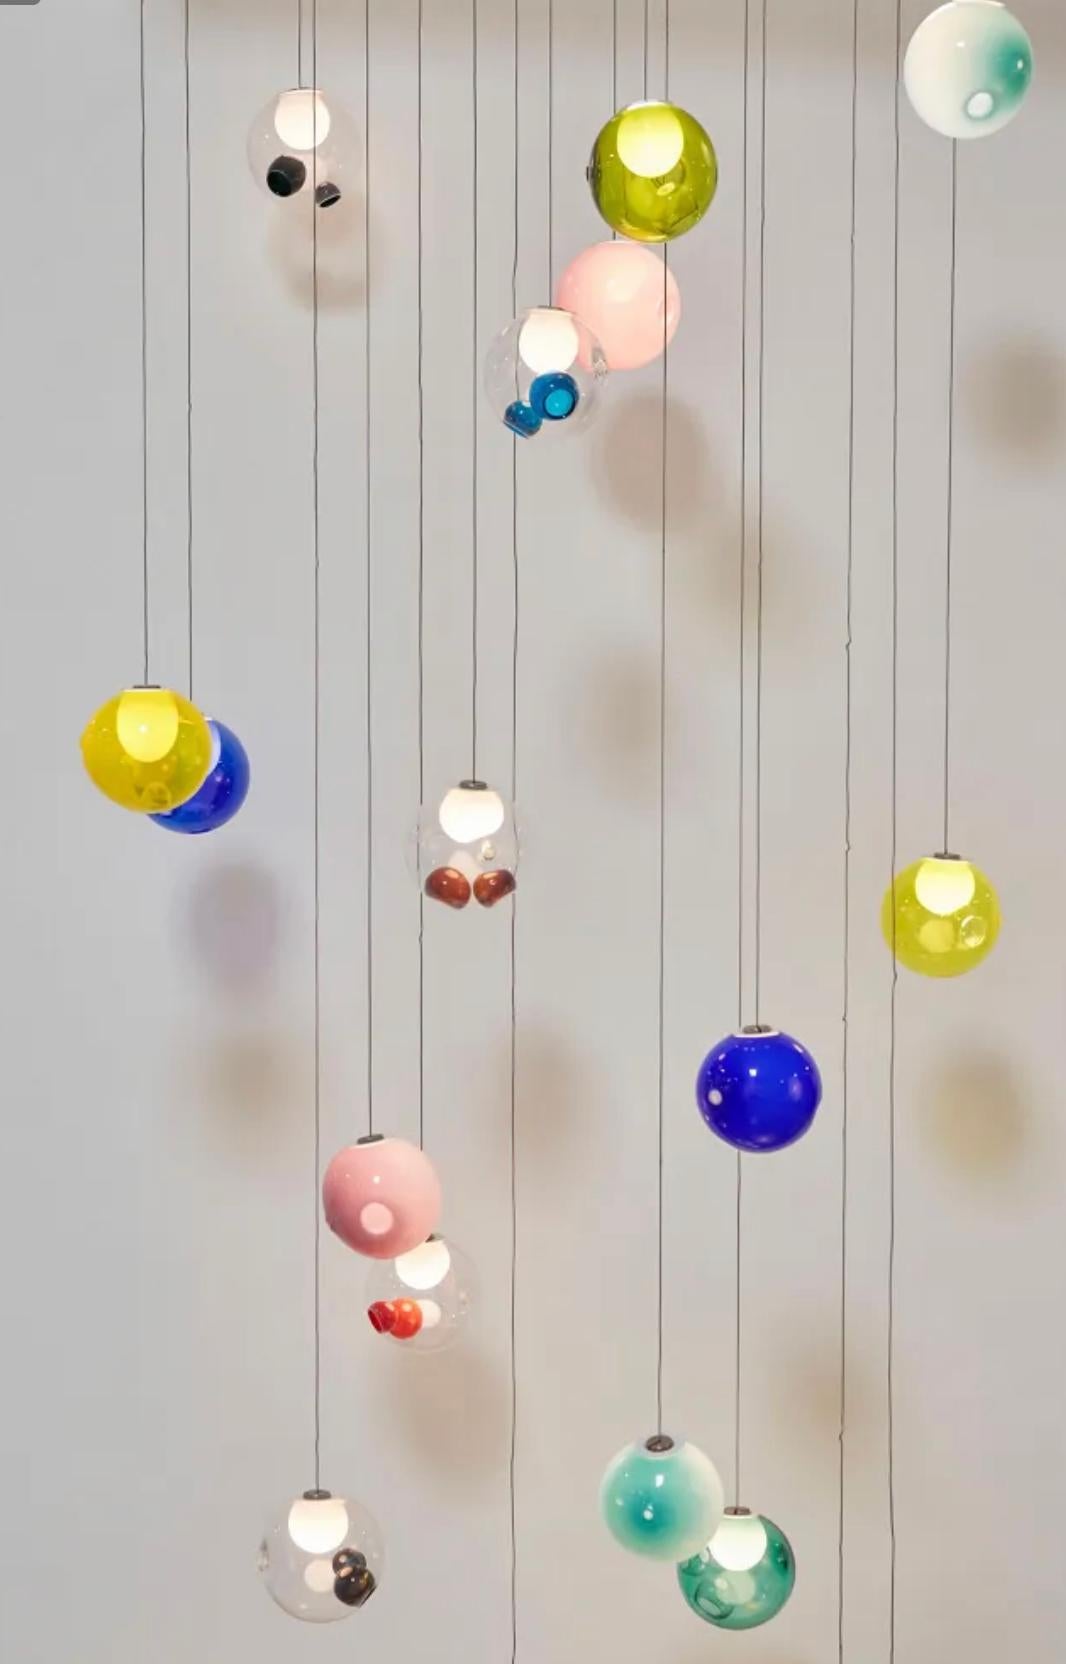 28.20 is a low-voltage arrangement of 20 blown-glass spheres. Each sphere contains an interior landscape of satellite shapes, including an opaque milk glass diffuser that houses the light source. 28.20 uses headphone jack connections, which allow